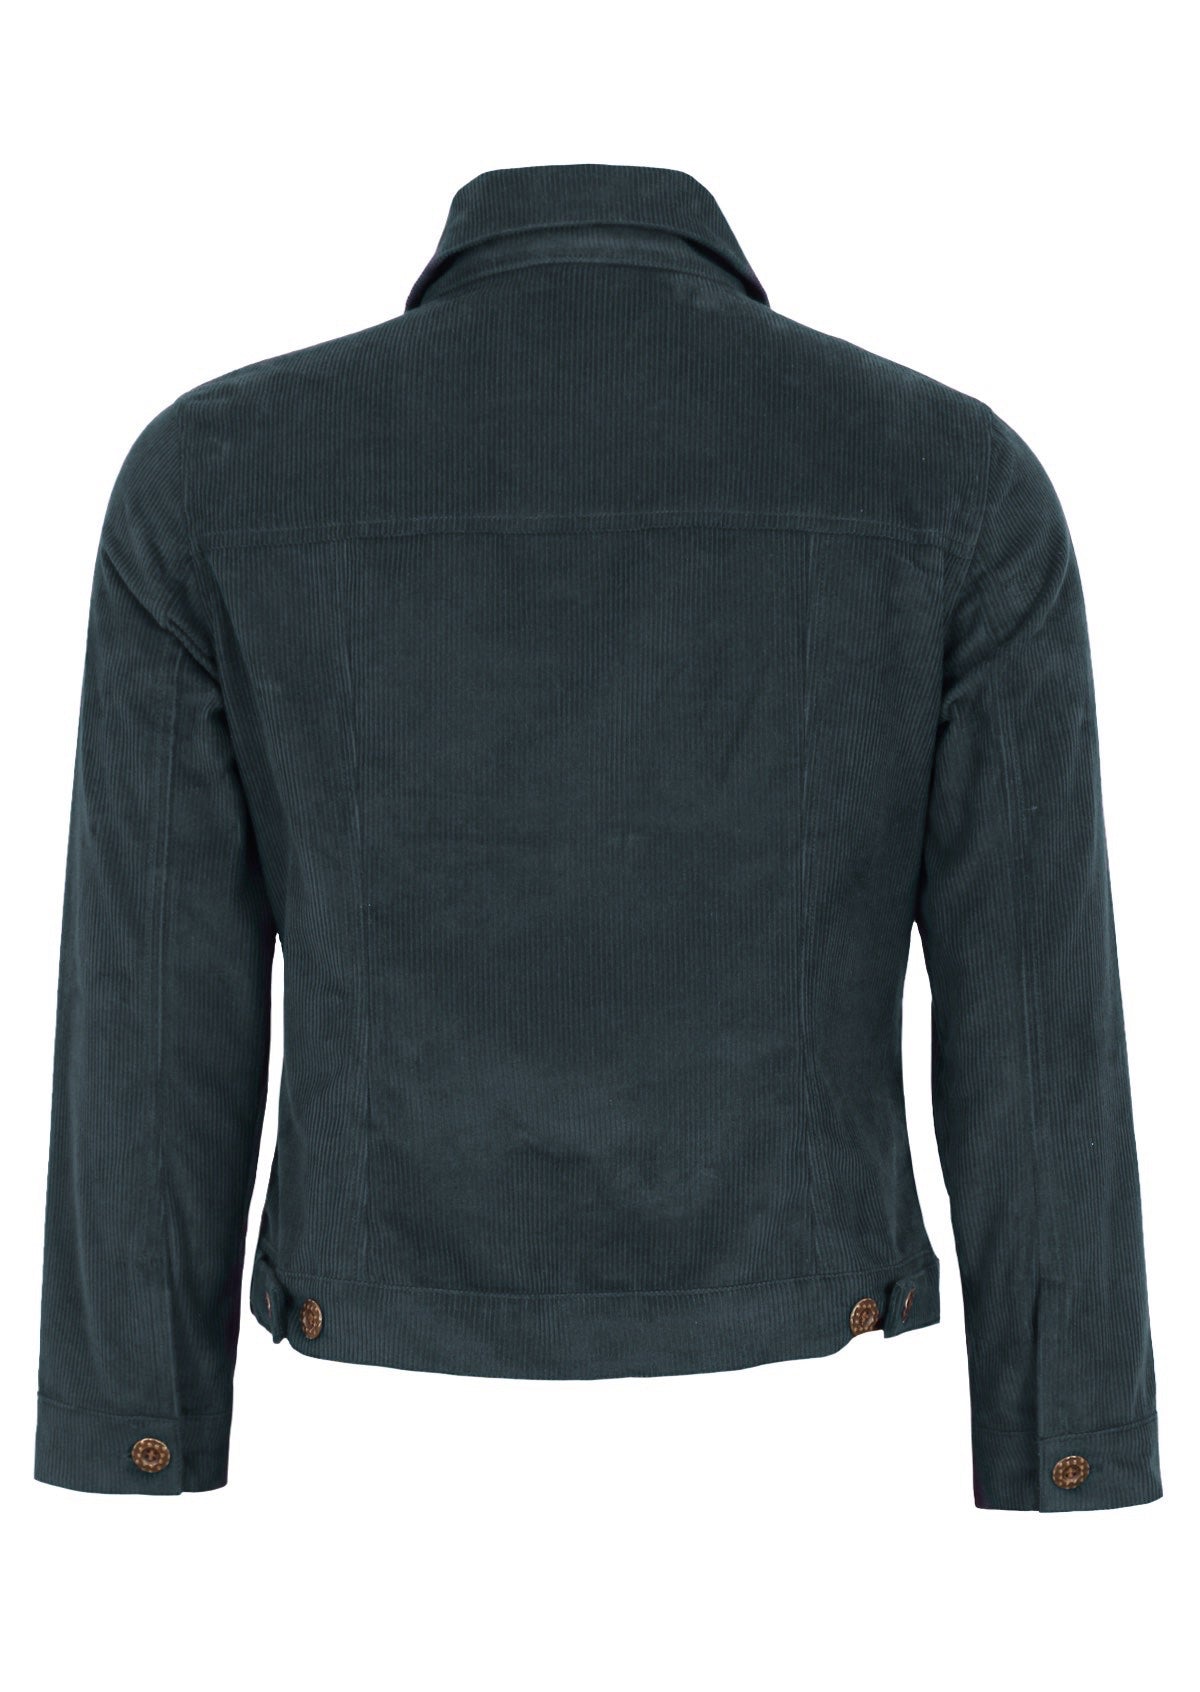 Grey corduroy jacket can be tightened or loosened with adjustable tabs. 